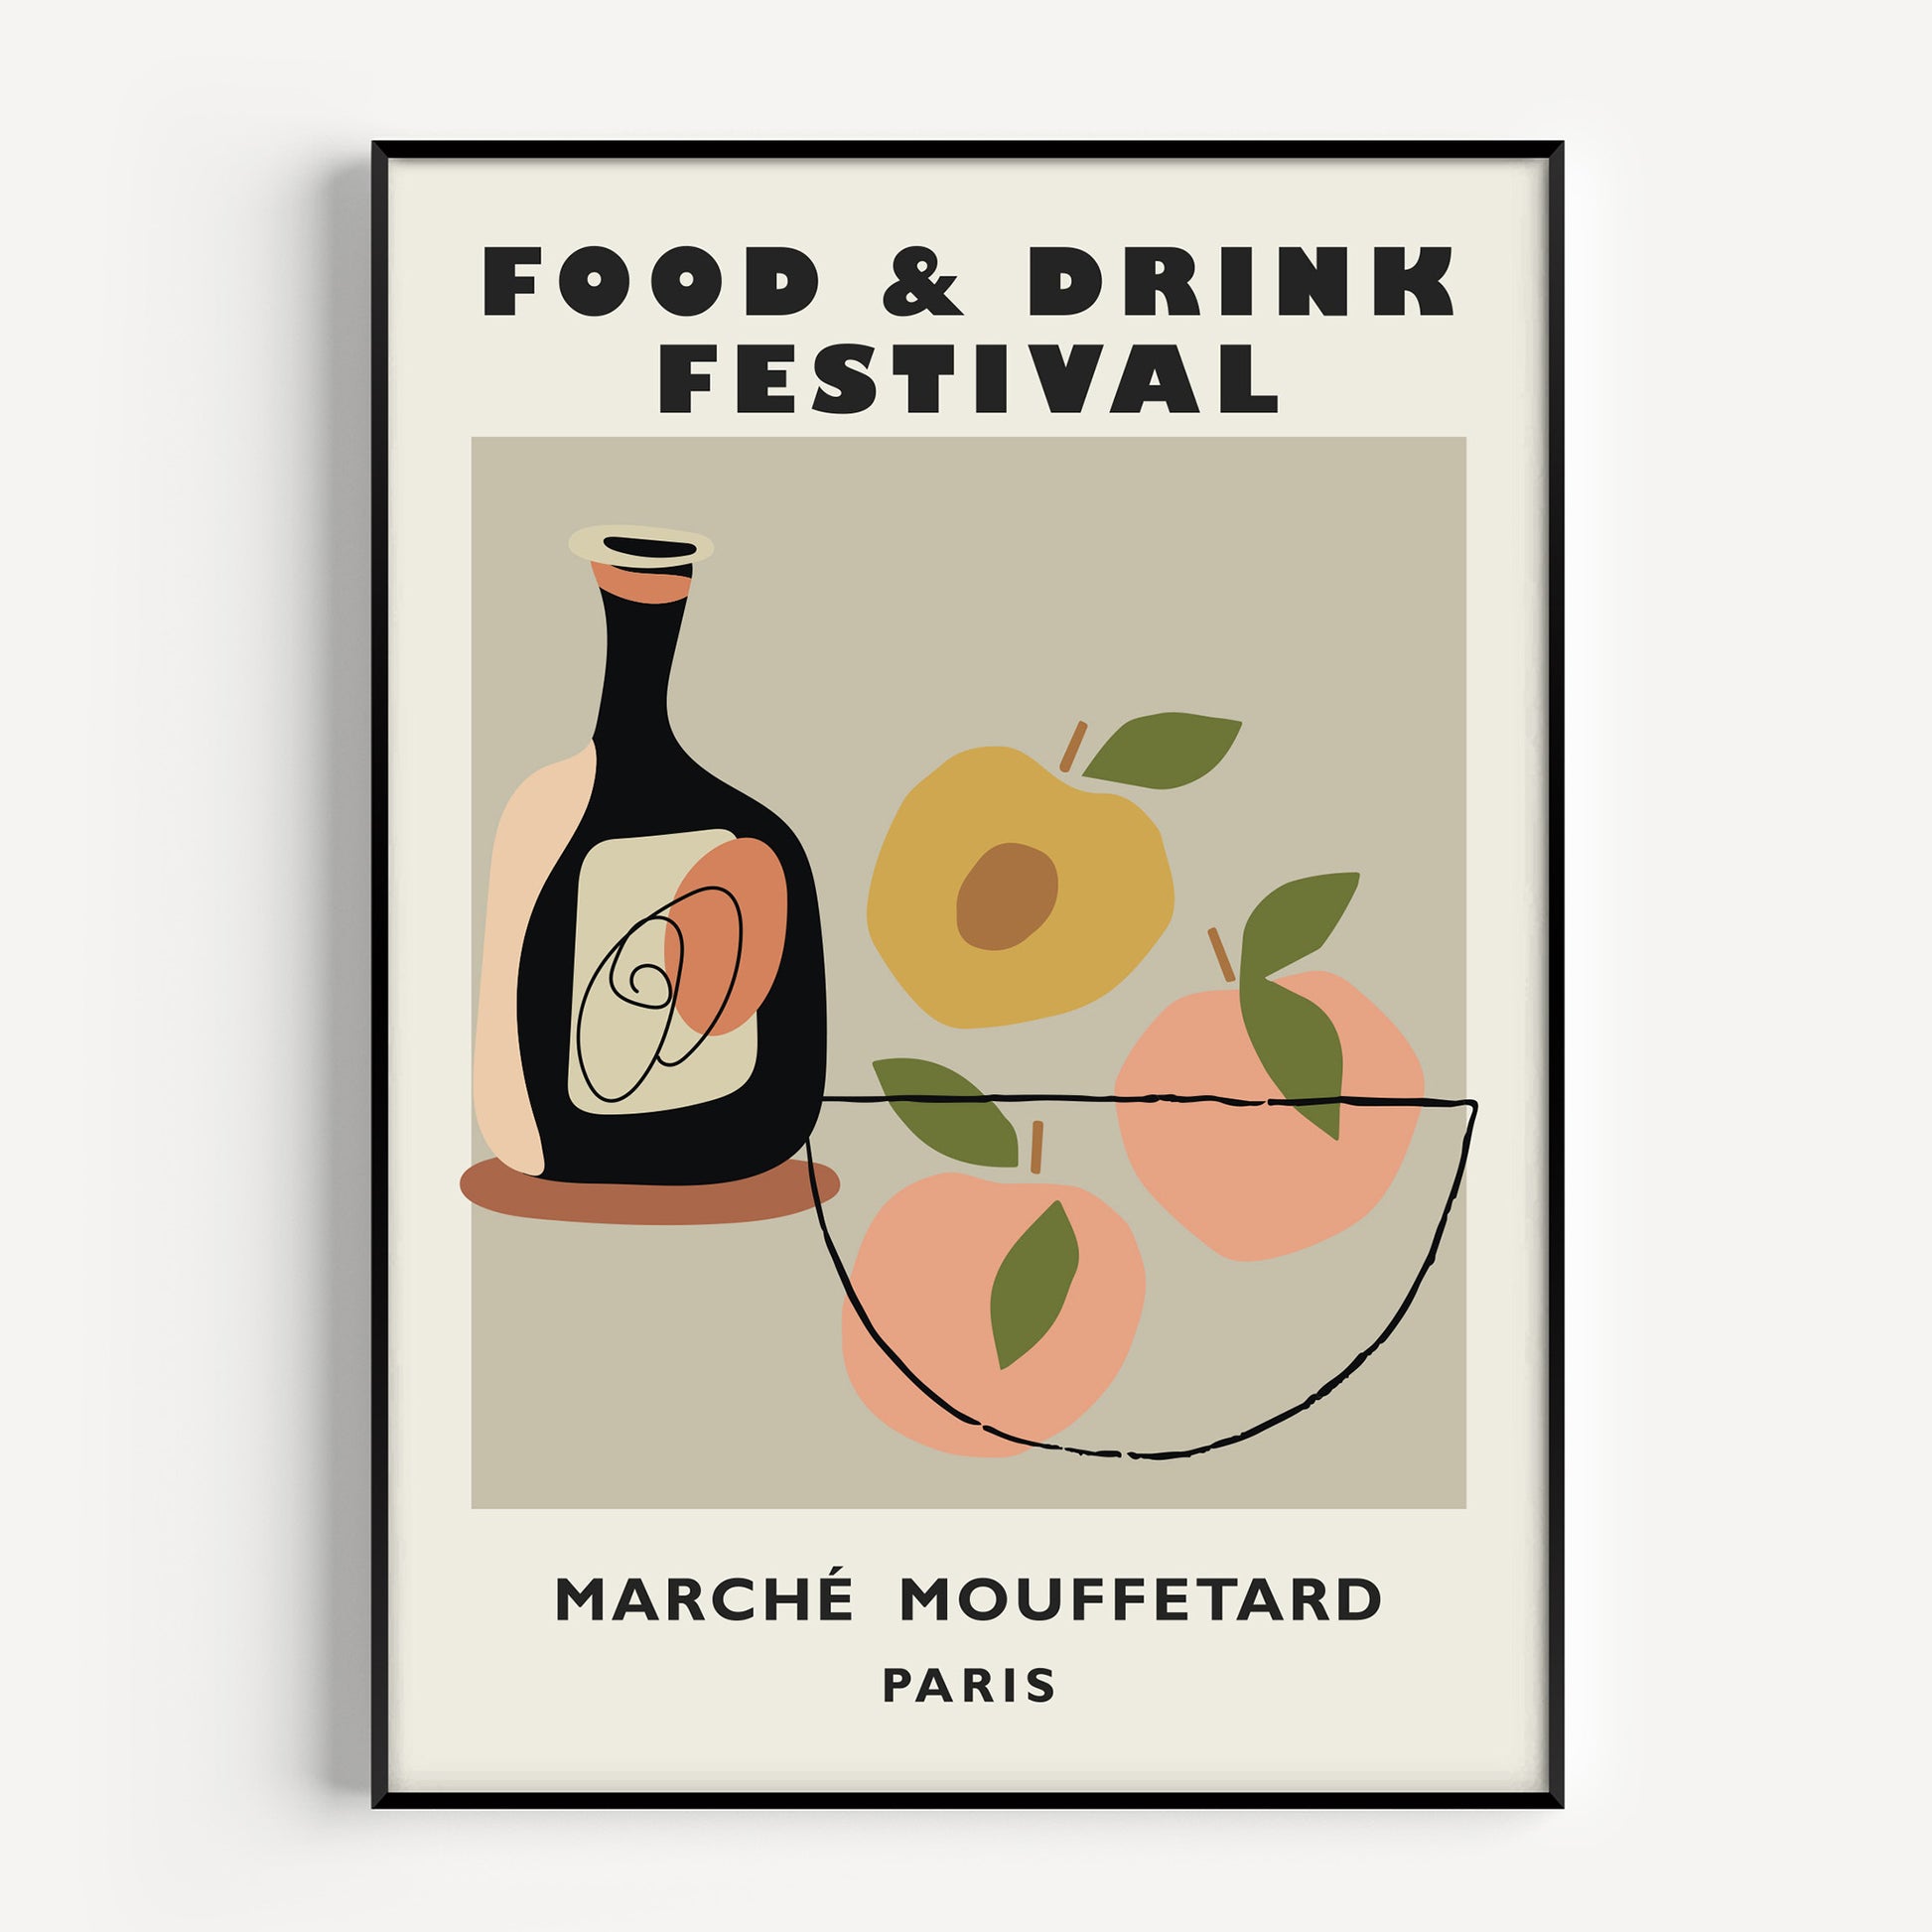 Food and drink festival print in a modern minimalist style